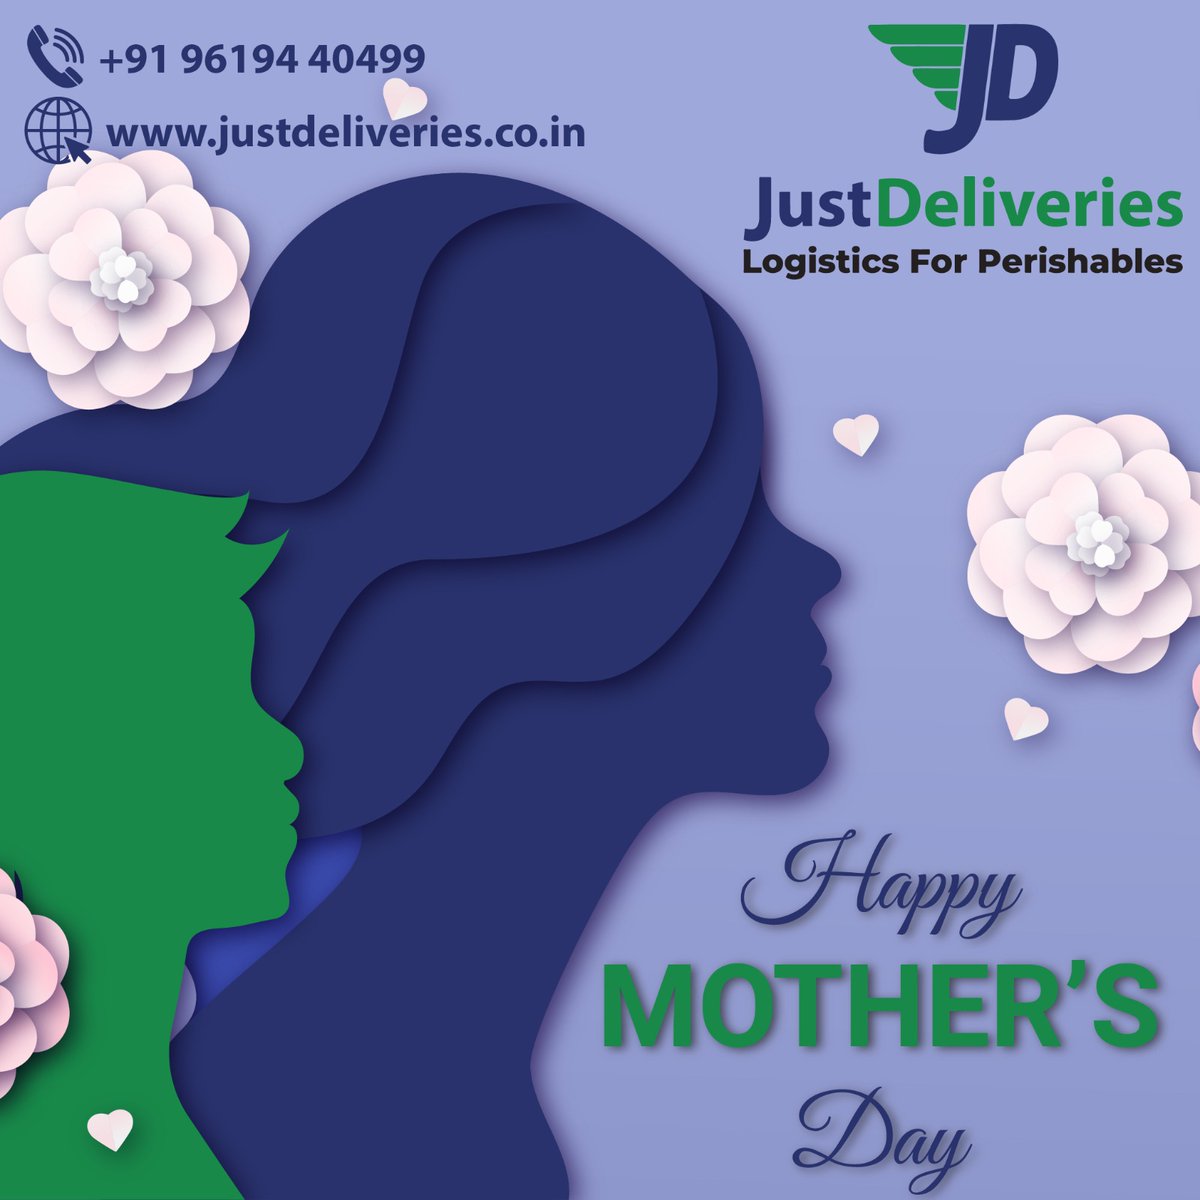 🎉 Happy Mother's Day to all the amazing moms out there! Show your appreciation by sending her something special 🛍️ We've got you covered for deliveries. #MothersDay2021 #MomsAreTheBest #GiftsForMom #CelebratingMotherhood #ThankYouMom